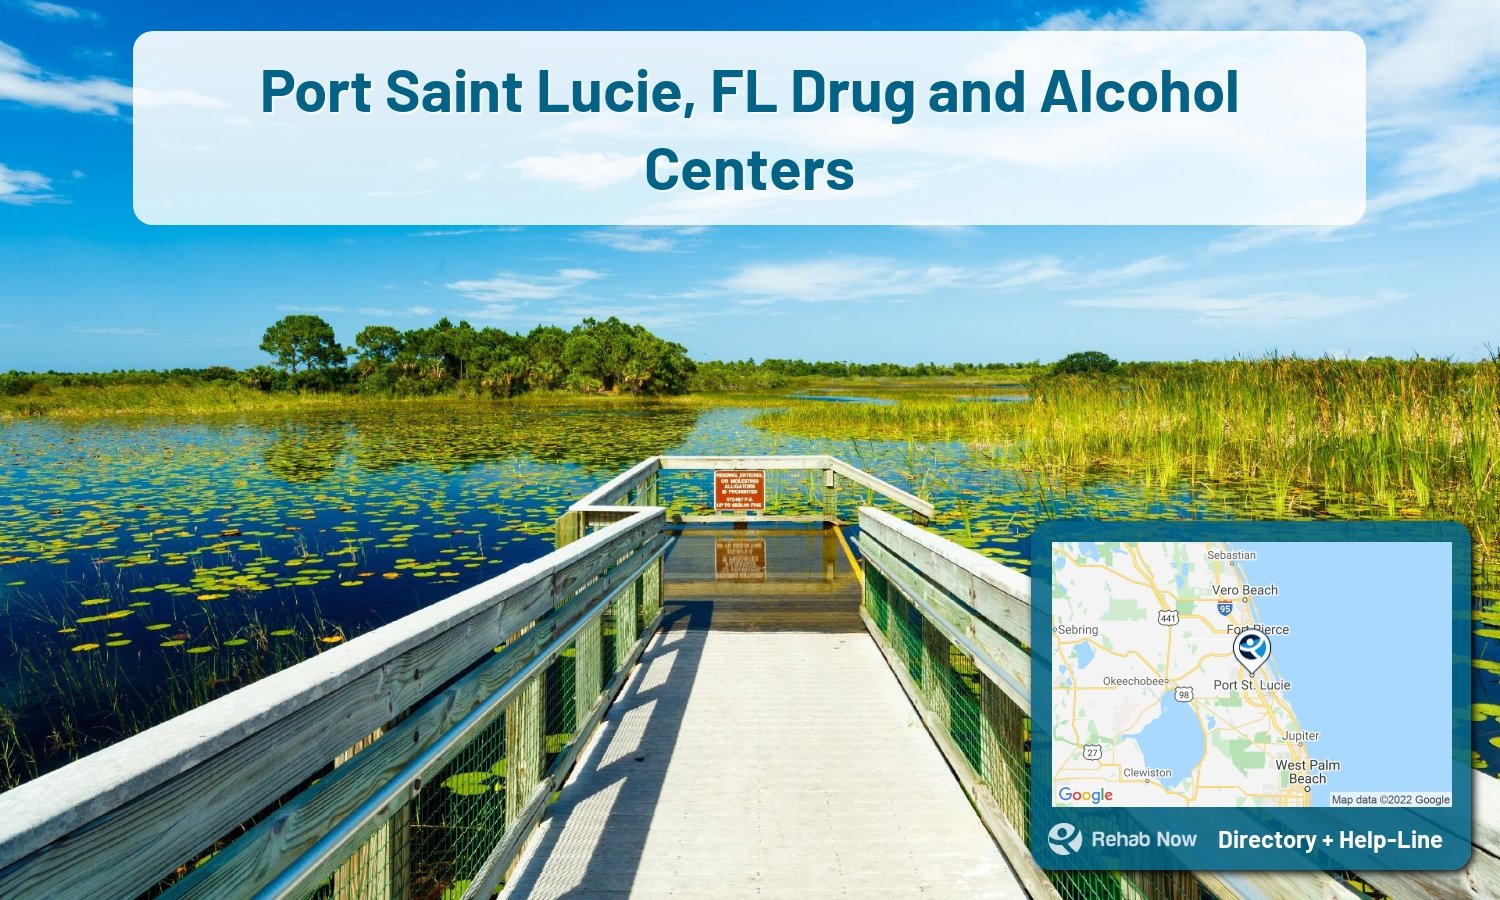 Ready to pick a rehab center in Port Saint Lucie? Get off alcohol, opiates, and other drugs, by selecting top drug rehab centers in Florida